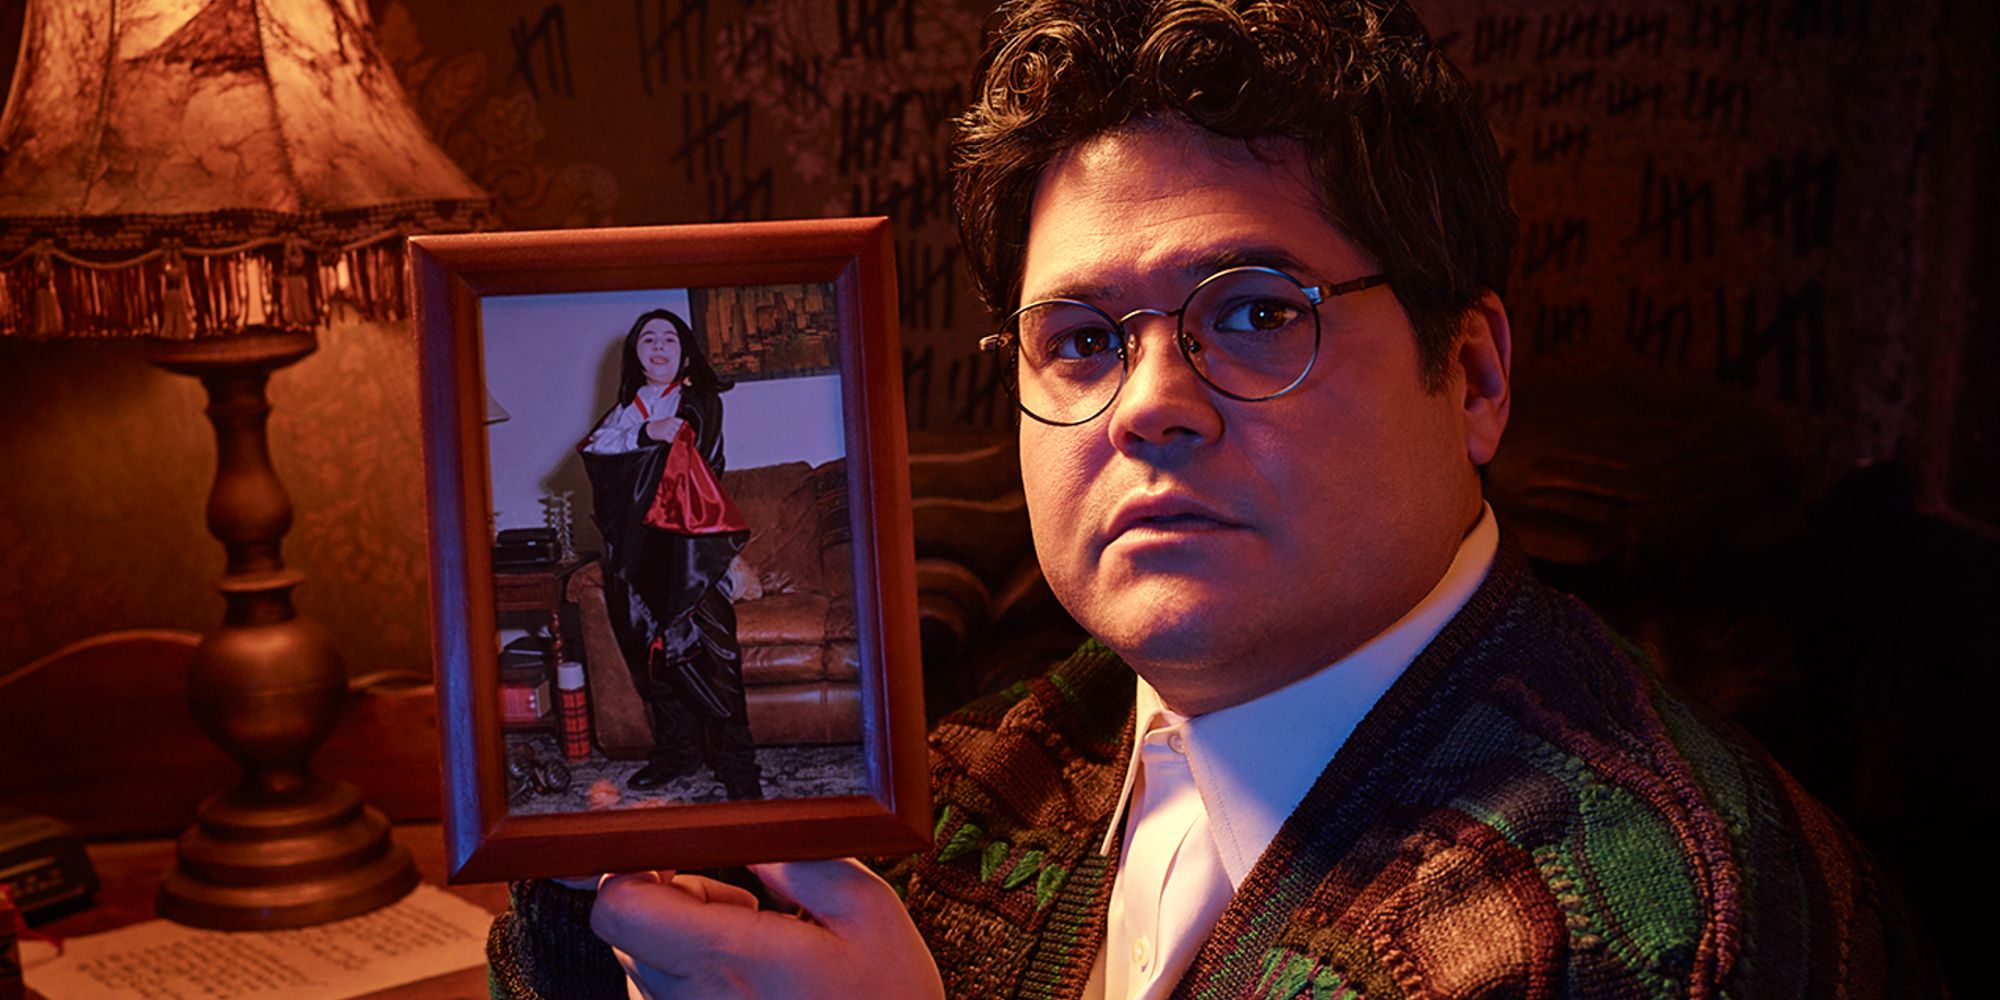 Harvey Guillen as Guillermo de la Cruz holding a framed photo in What We Do In The Shadows